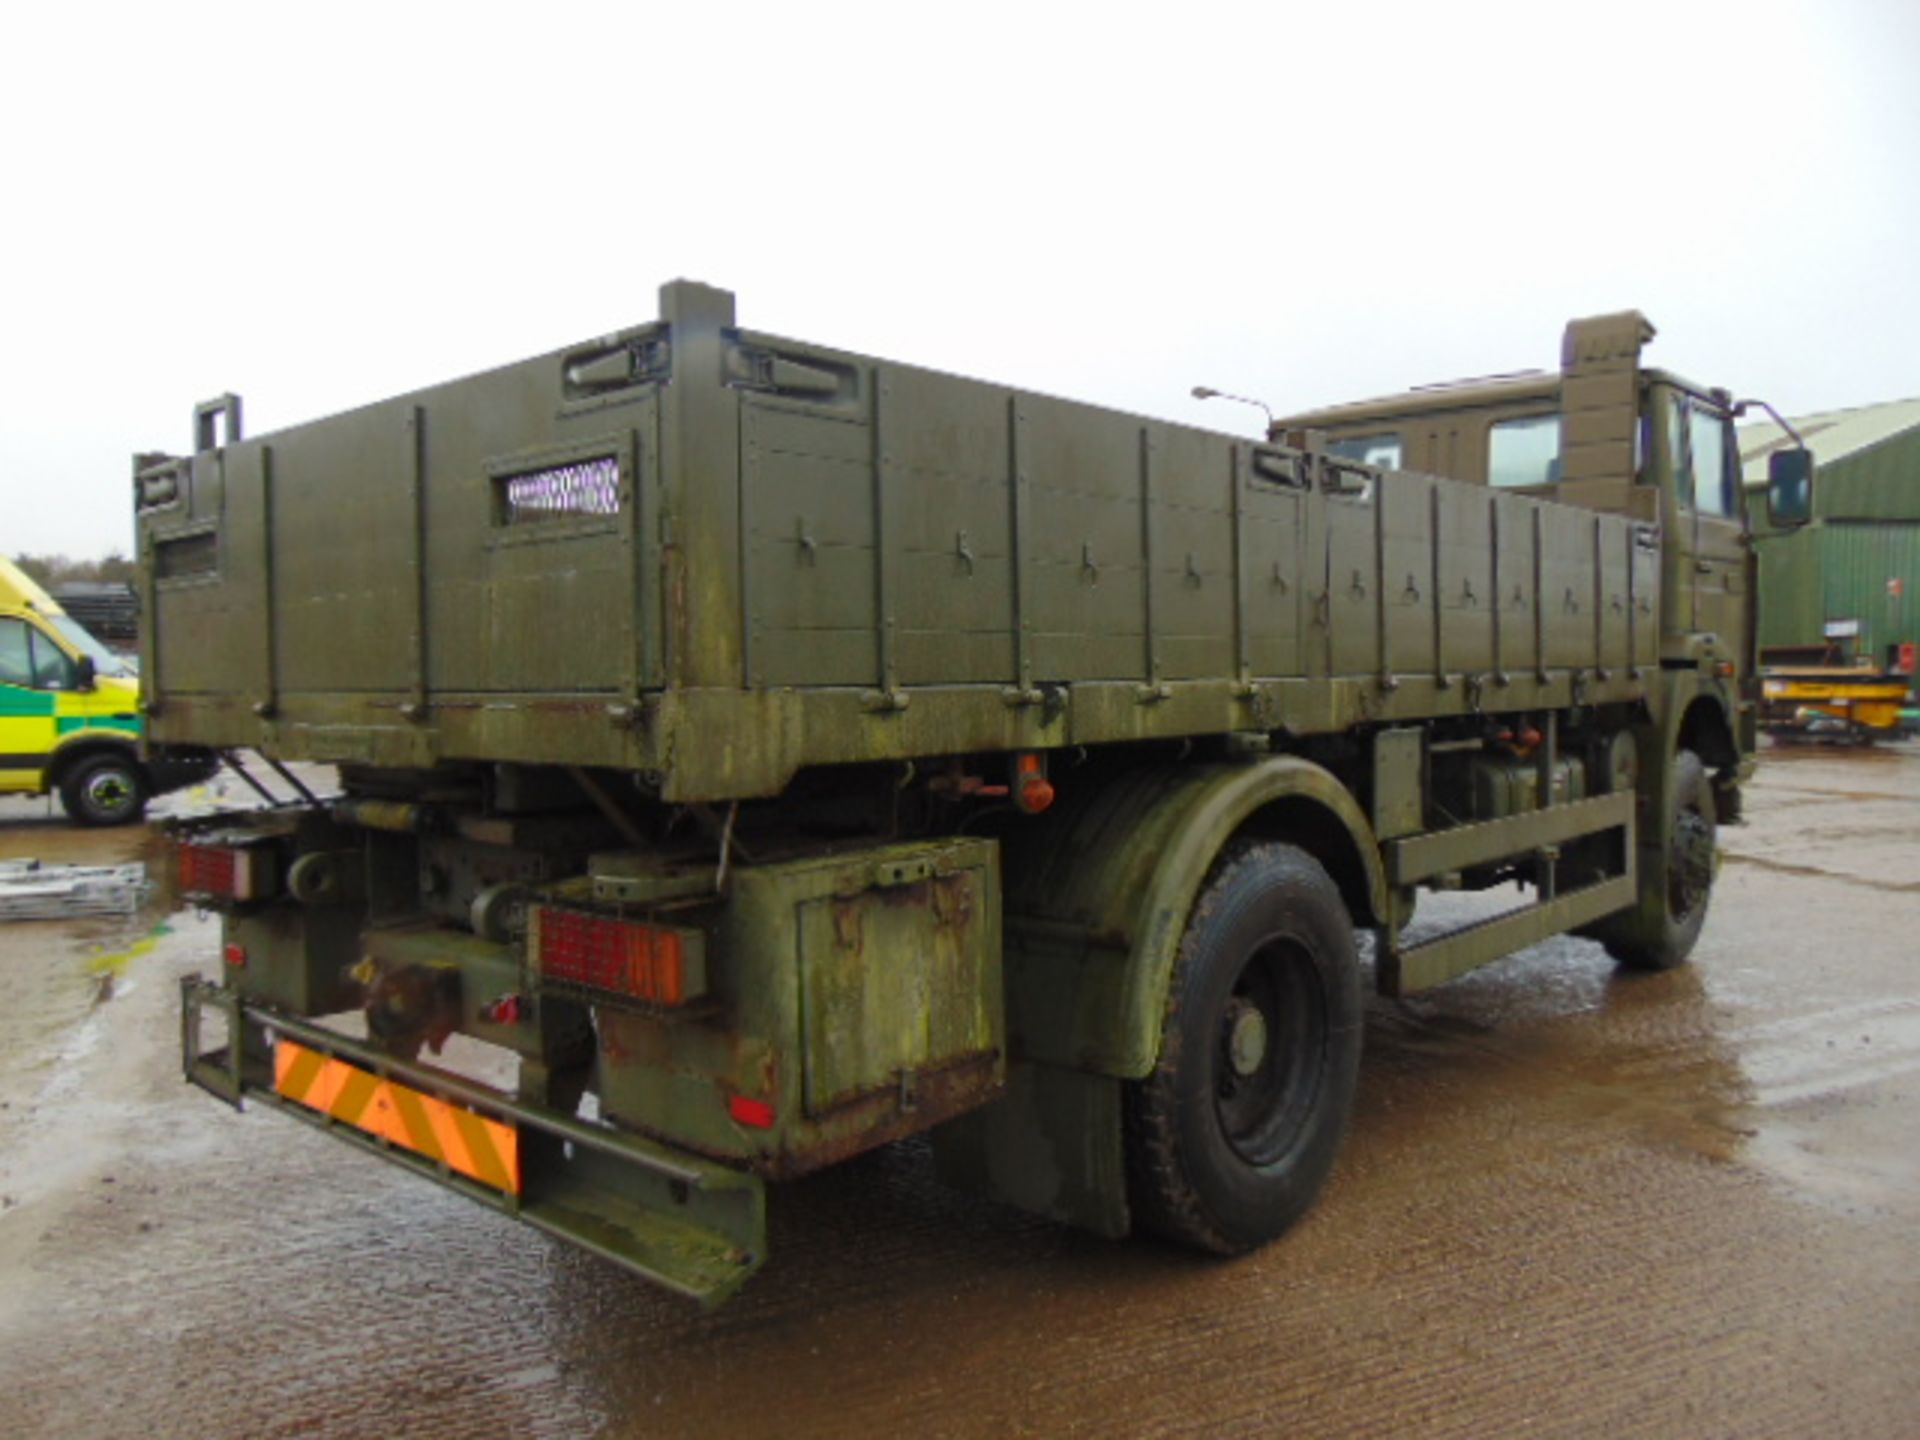 Renault G300 Maxter RHD 4x4 8T Cargo Truck with Fitted Winch - Image 7 of 17